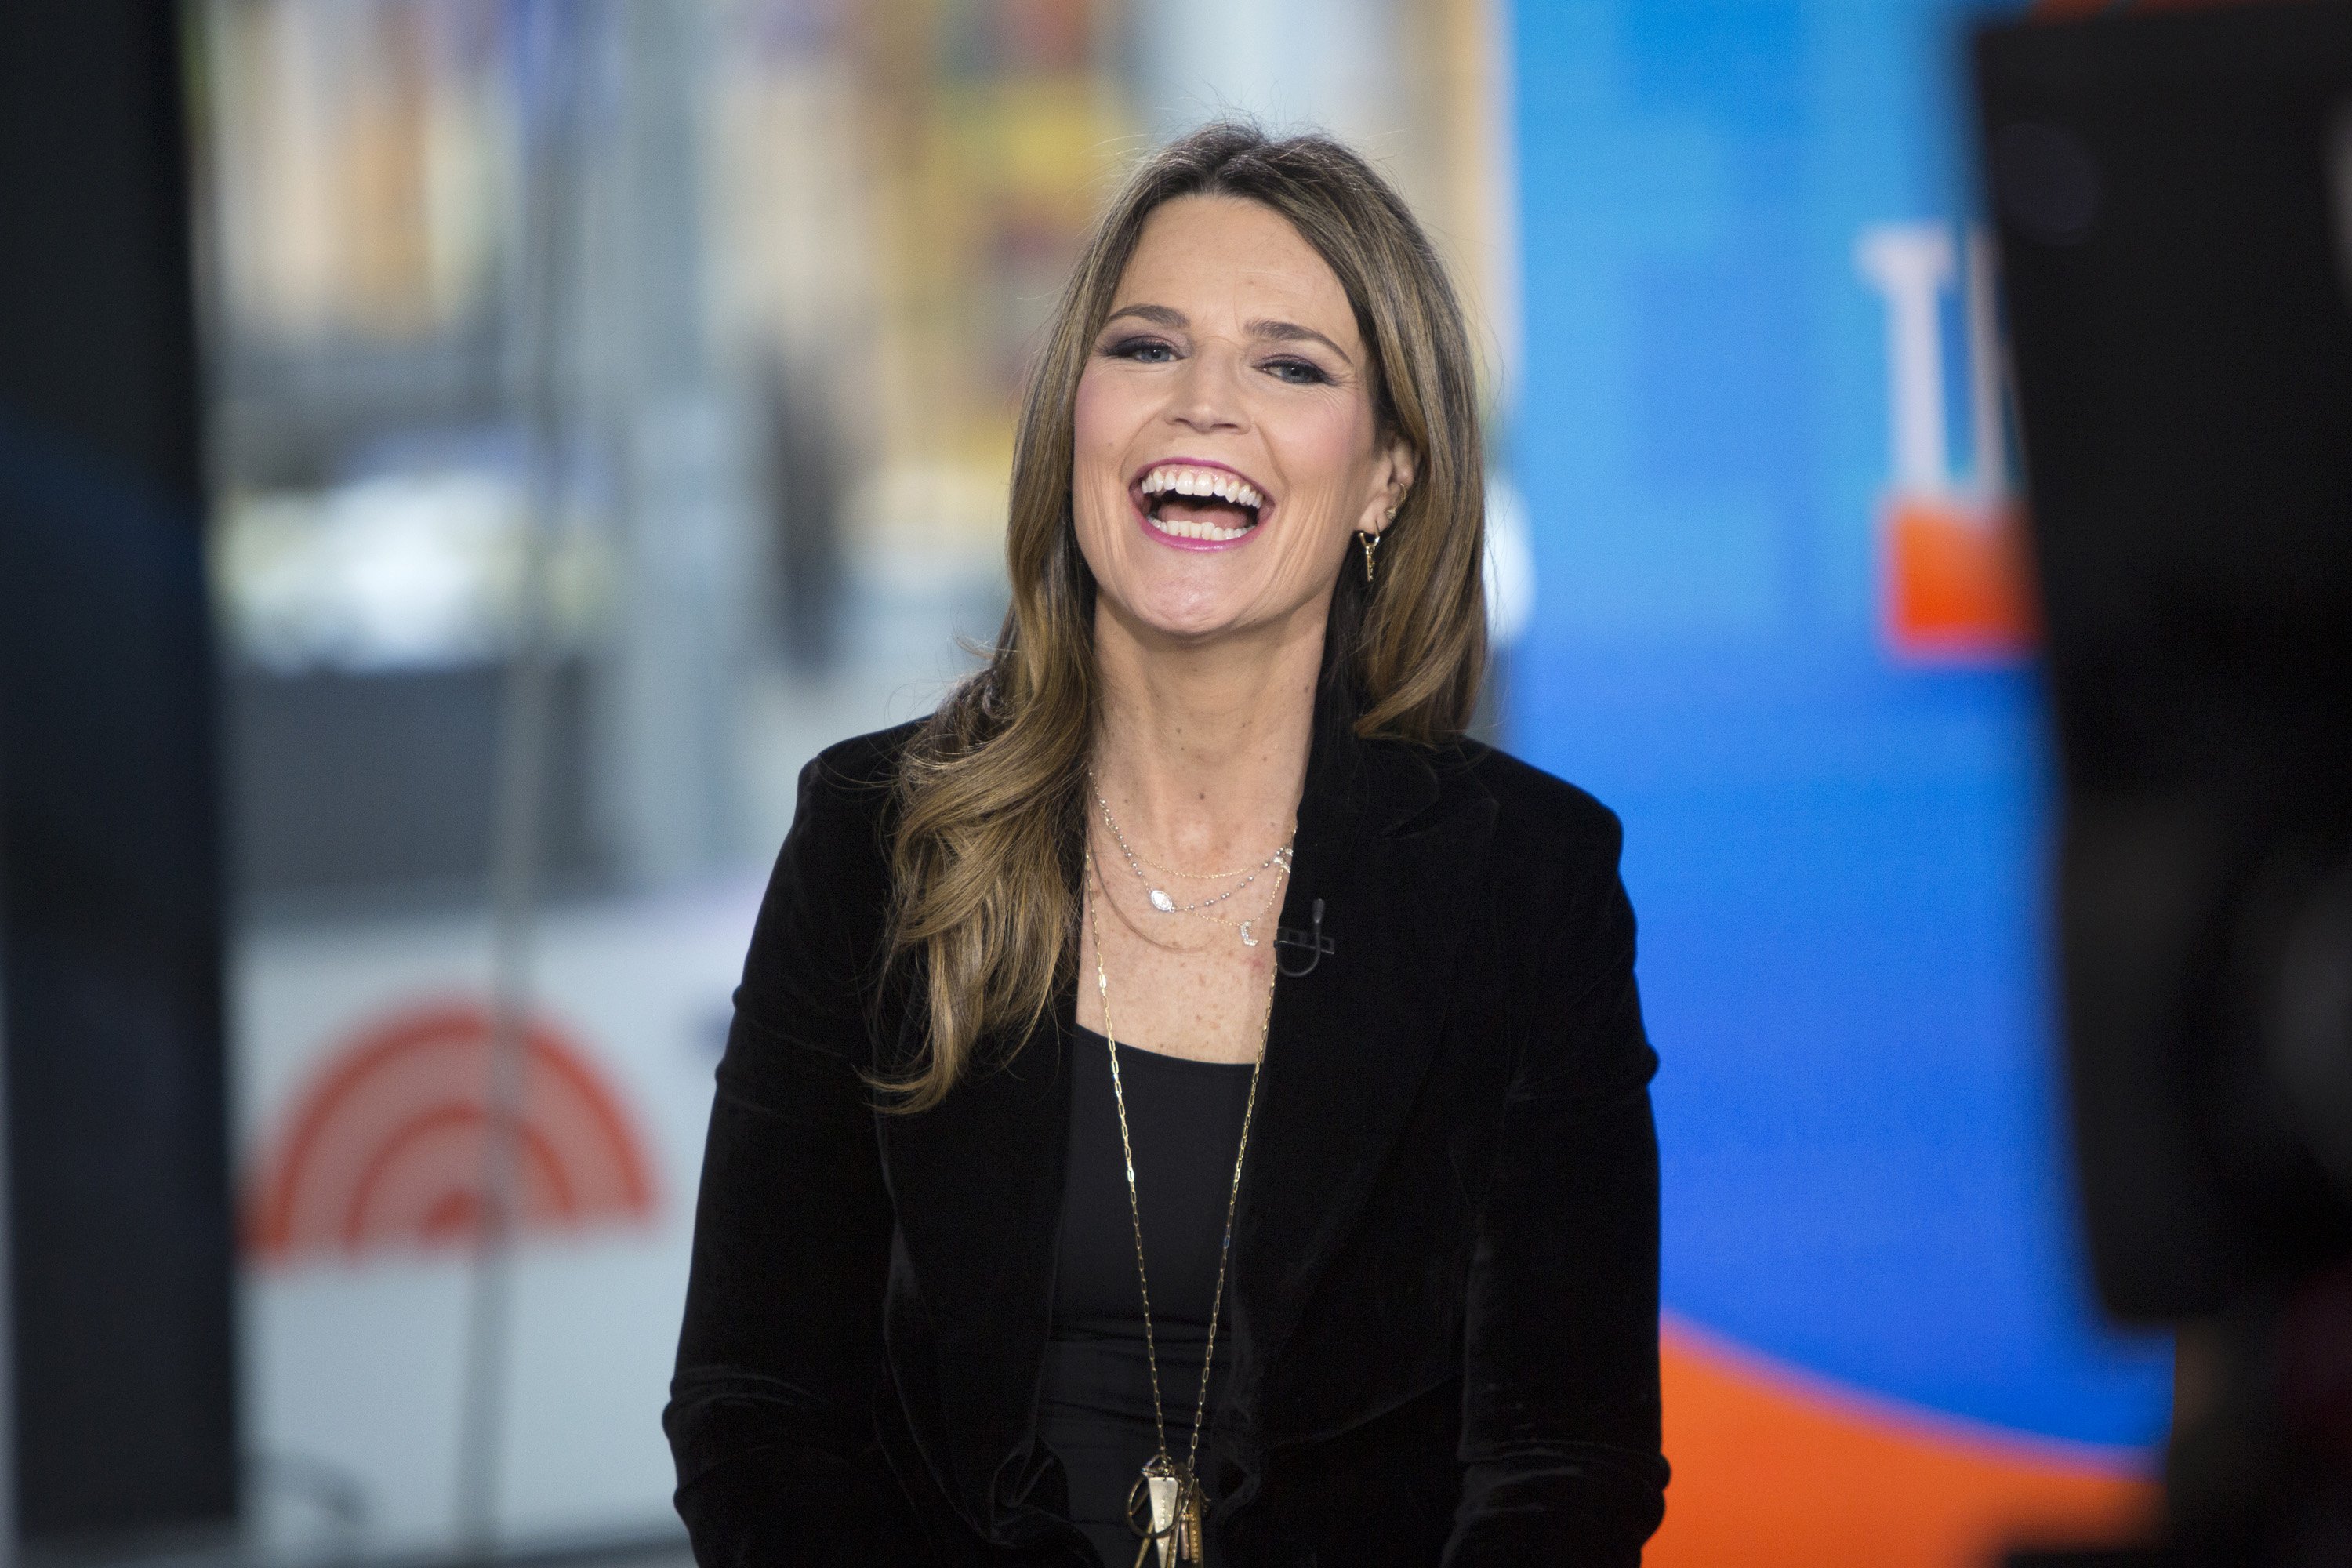 Savannah Guthrie on Tuesday January 9, 2018. | Source: Getty Images